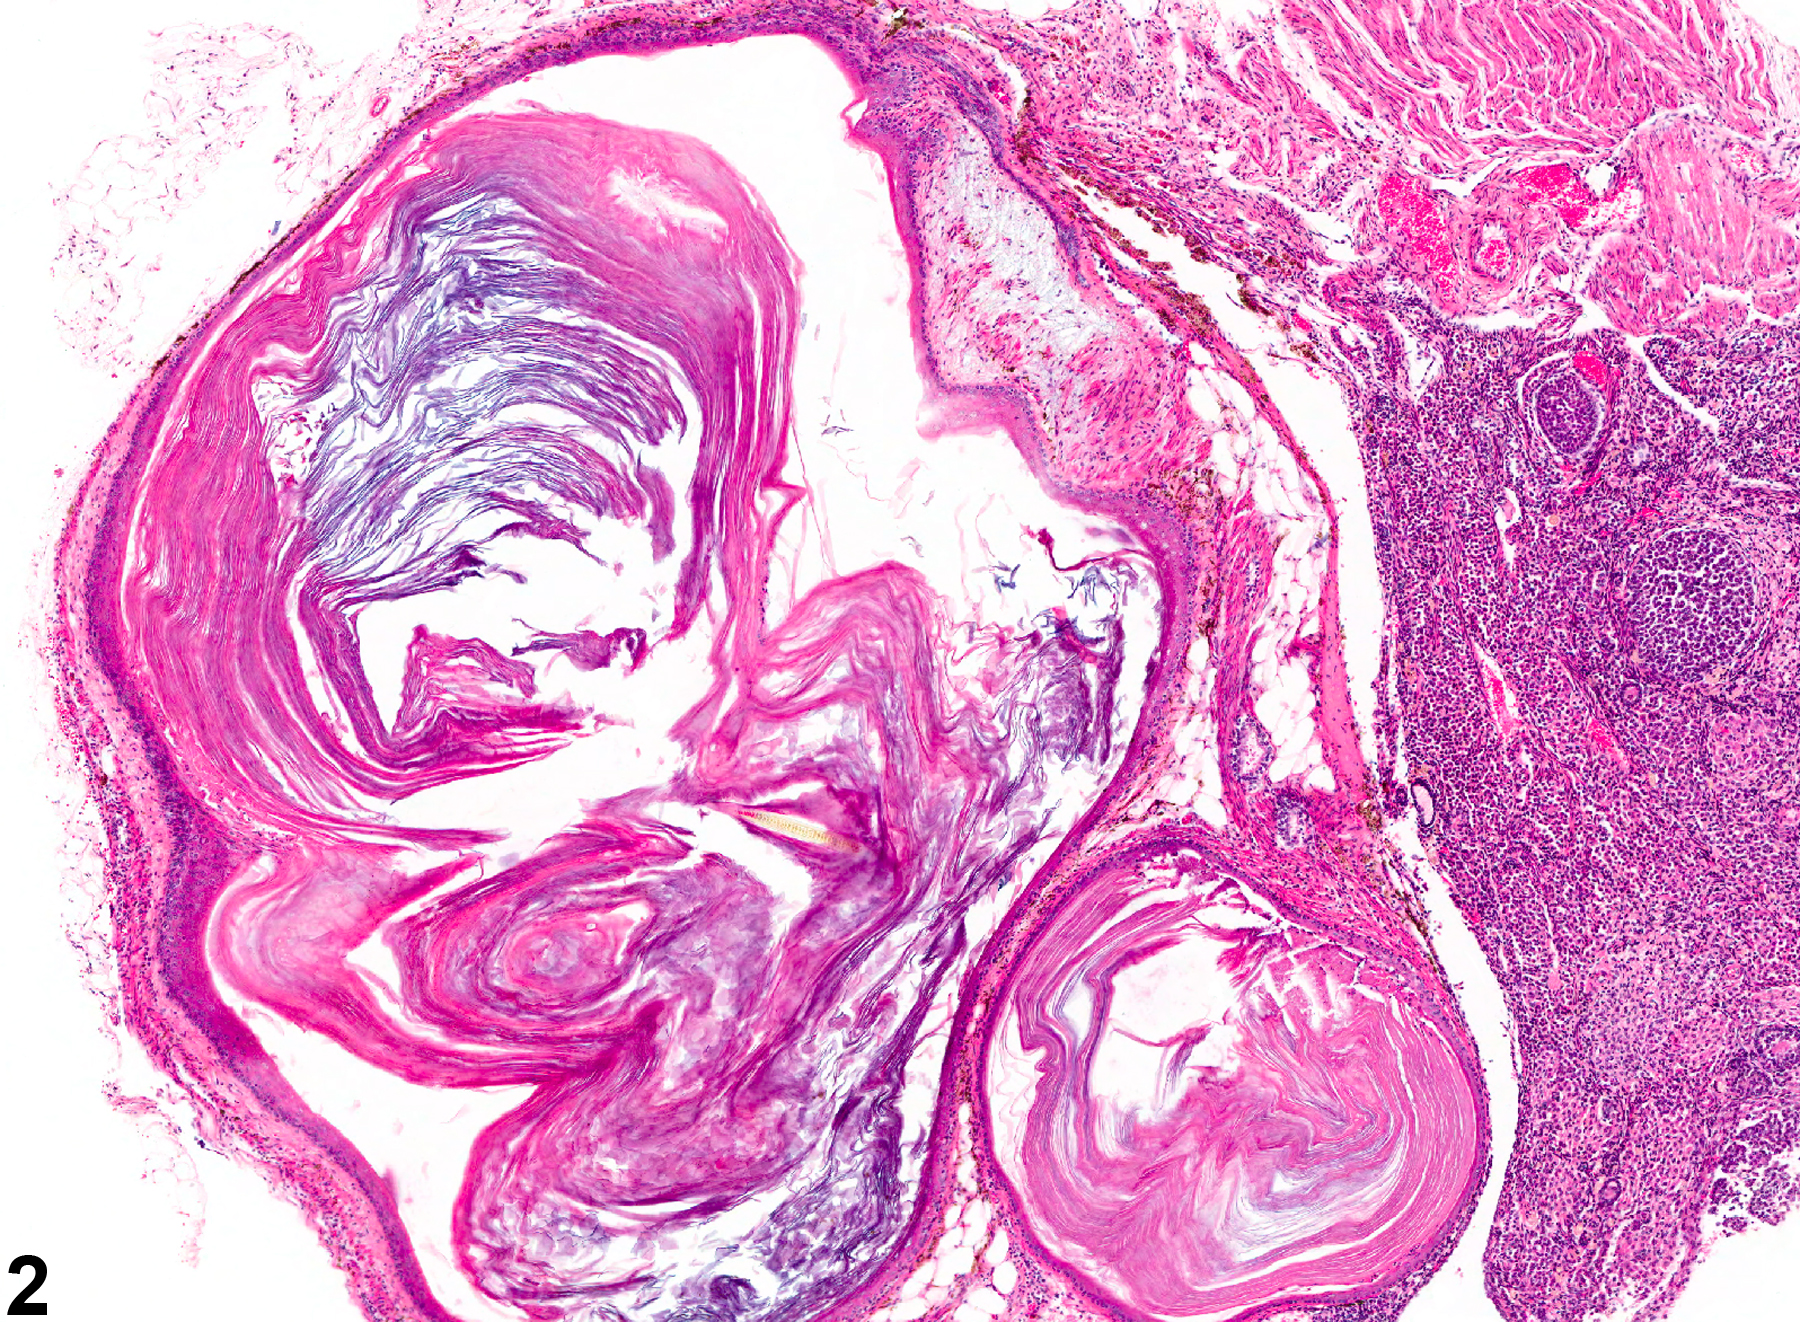 Image of cyst, epithelial in the ovary from a female B6C3F1 mouse in a chronic study